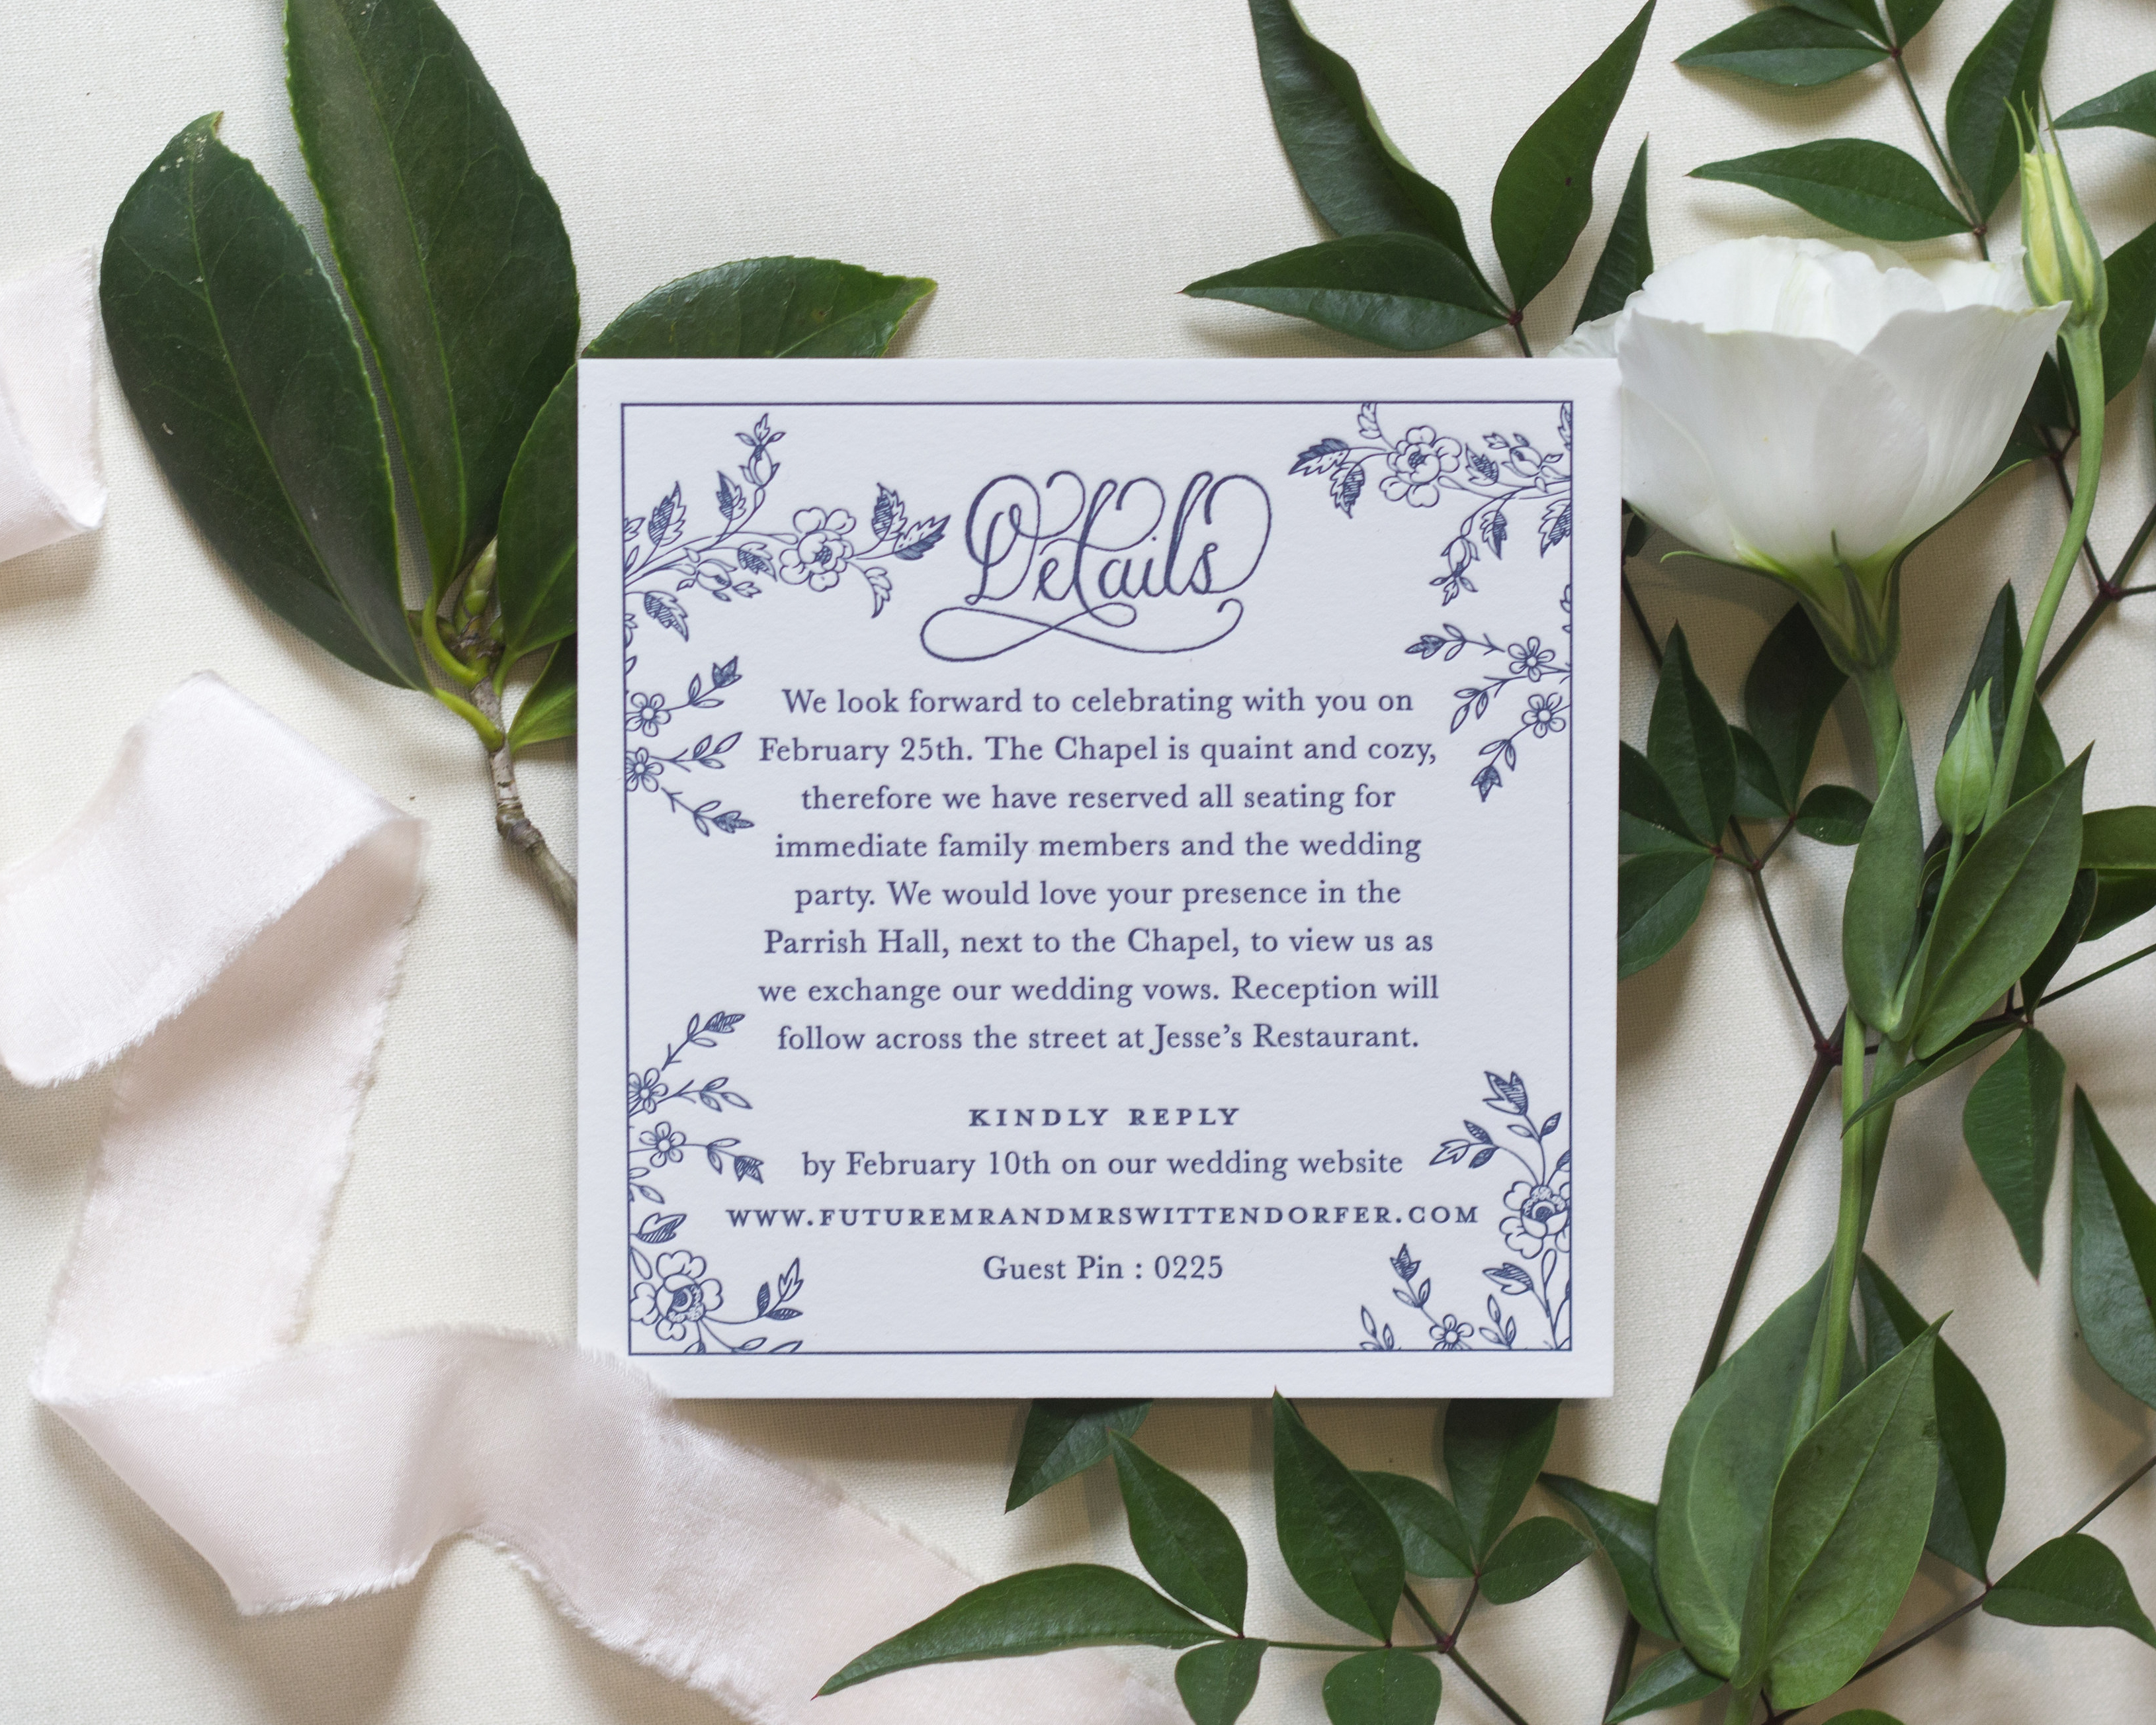 Regal Navy and Gold Foil Calligraphy Wedding Invitations by Kara Anne Paper